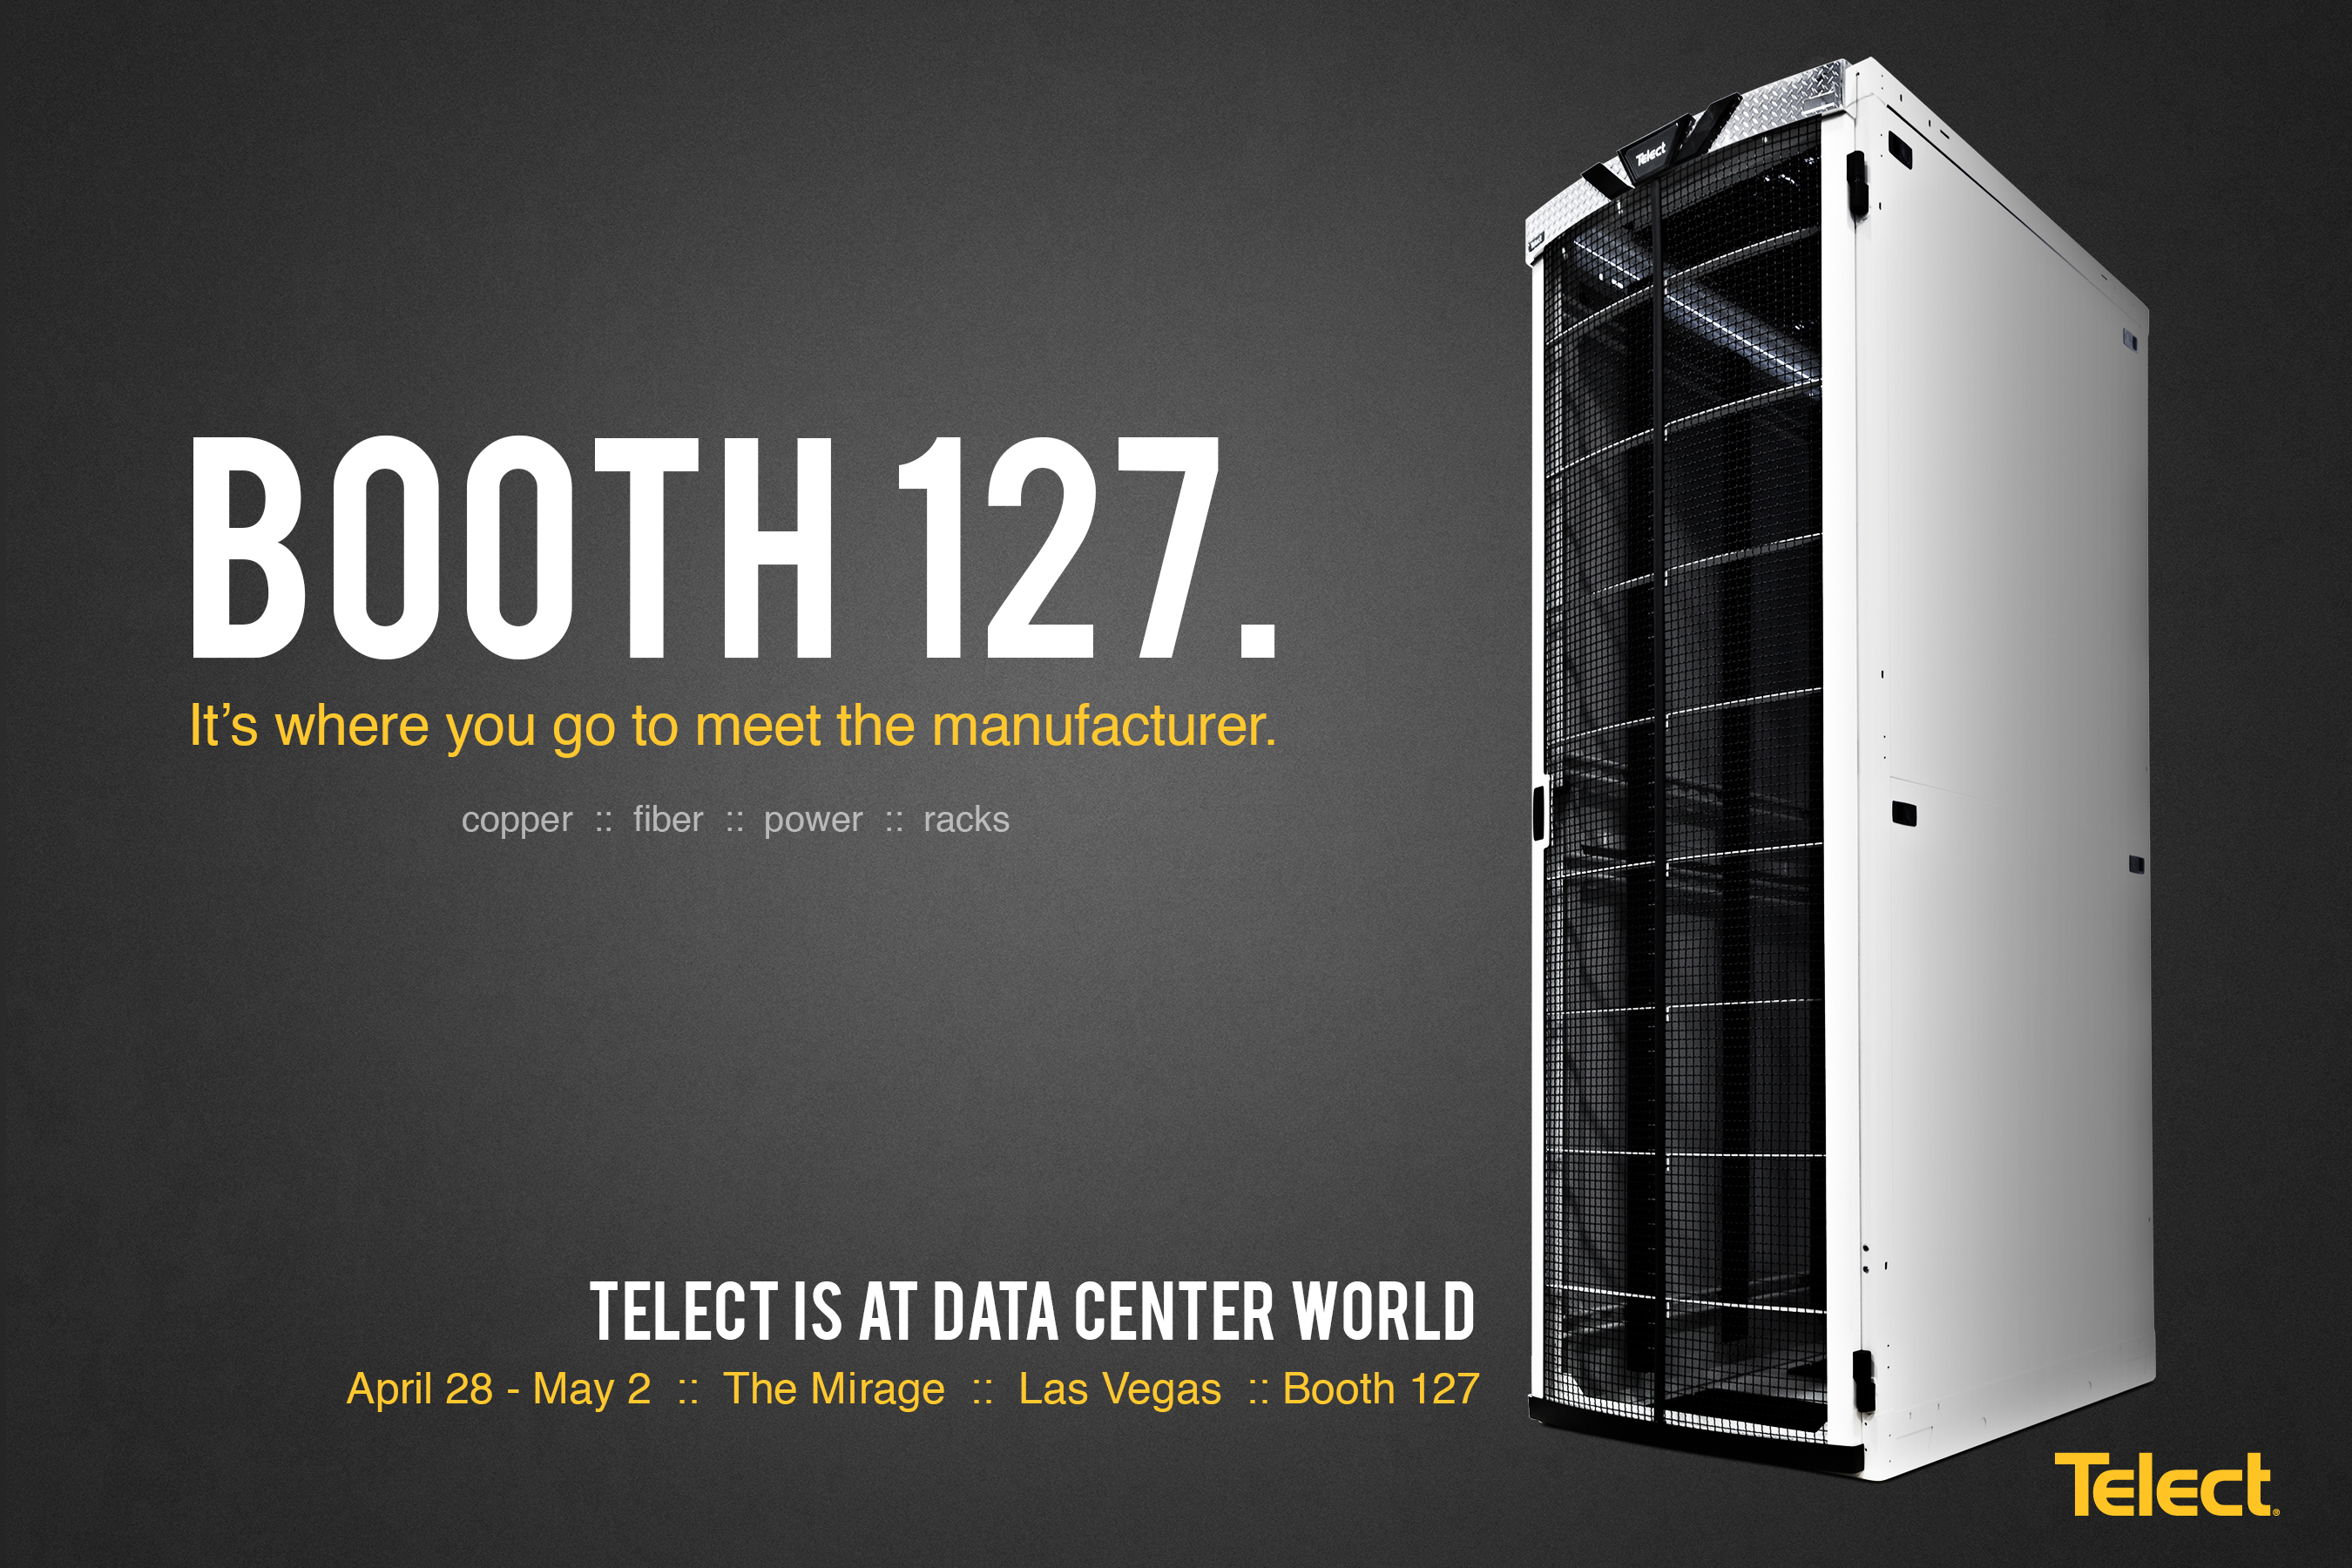 Booth 127. It's where you go to meet the manufacturer. Telect's product experts will exhibit Telect Data Center Solutions at the Data Center World Global Conference, in Las Vegas, April 28 through May 2, 2014. Connecting the Future(TM) for more than 31 years, Telect designs and manufactures industry-leading data center solutions, including fiber connectivity and DC power distribution equipment, seismic and non-seismic racks and enclosures, cable management, and integrated equipment solutions. Telect is headquartered in Liberty Lake, Washington, with manufacturing facilities in Plano, Texas and Guadalajara, Mexico. Telect is standardized with every major carrier. We simplify networks(TM). 509.926.6000 www.telect.com (PRNewsFoto/Telect)